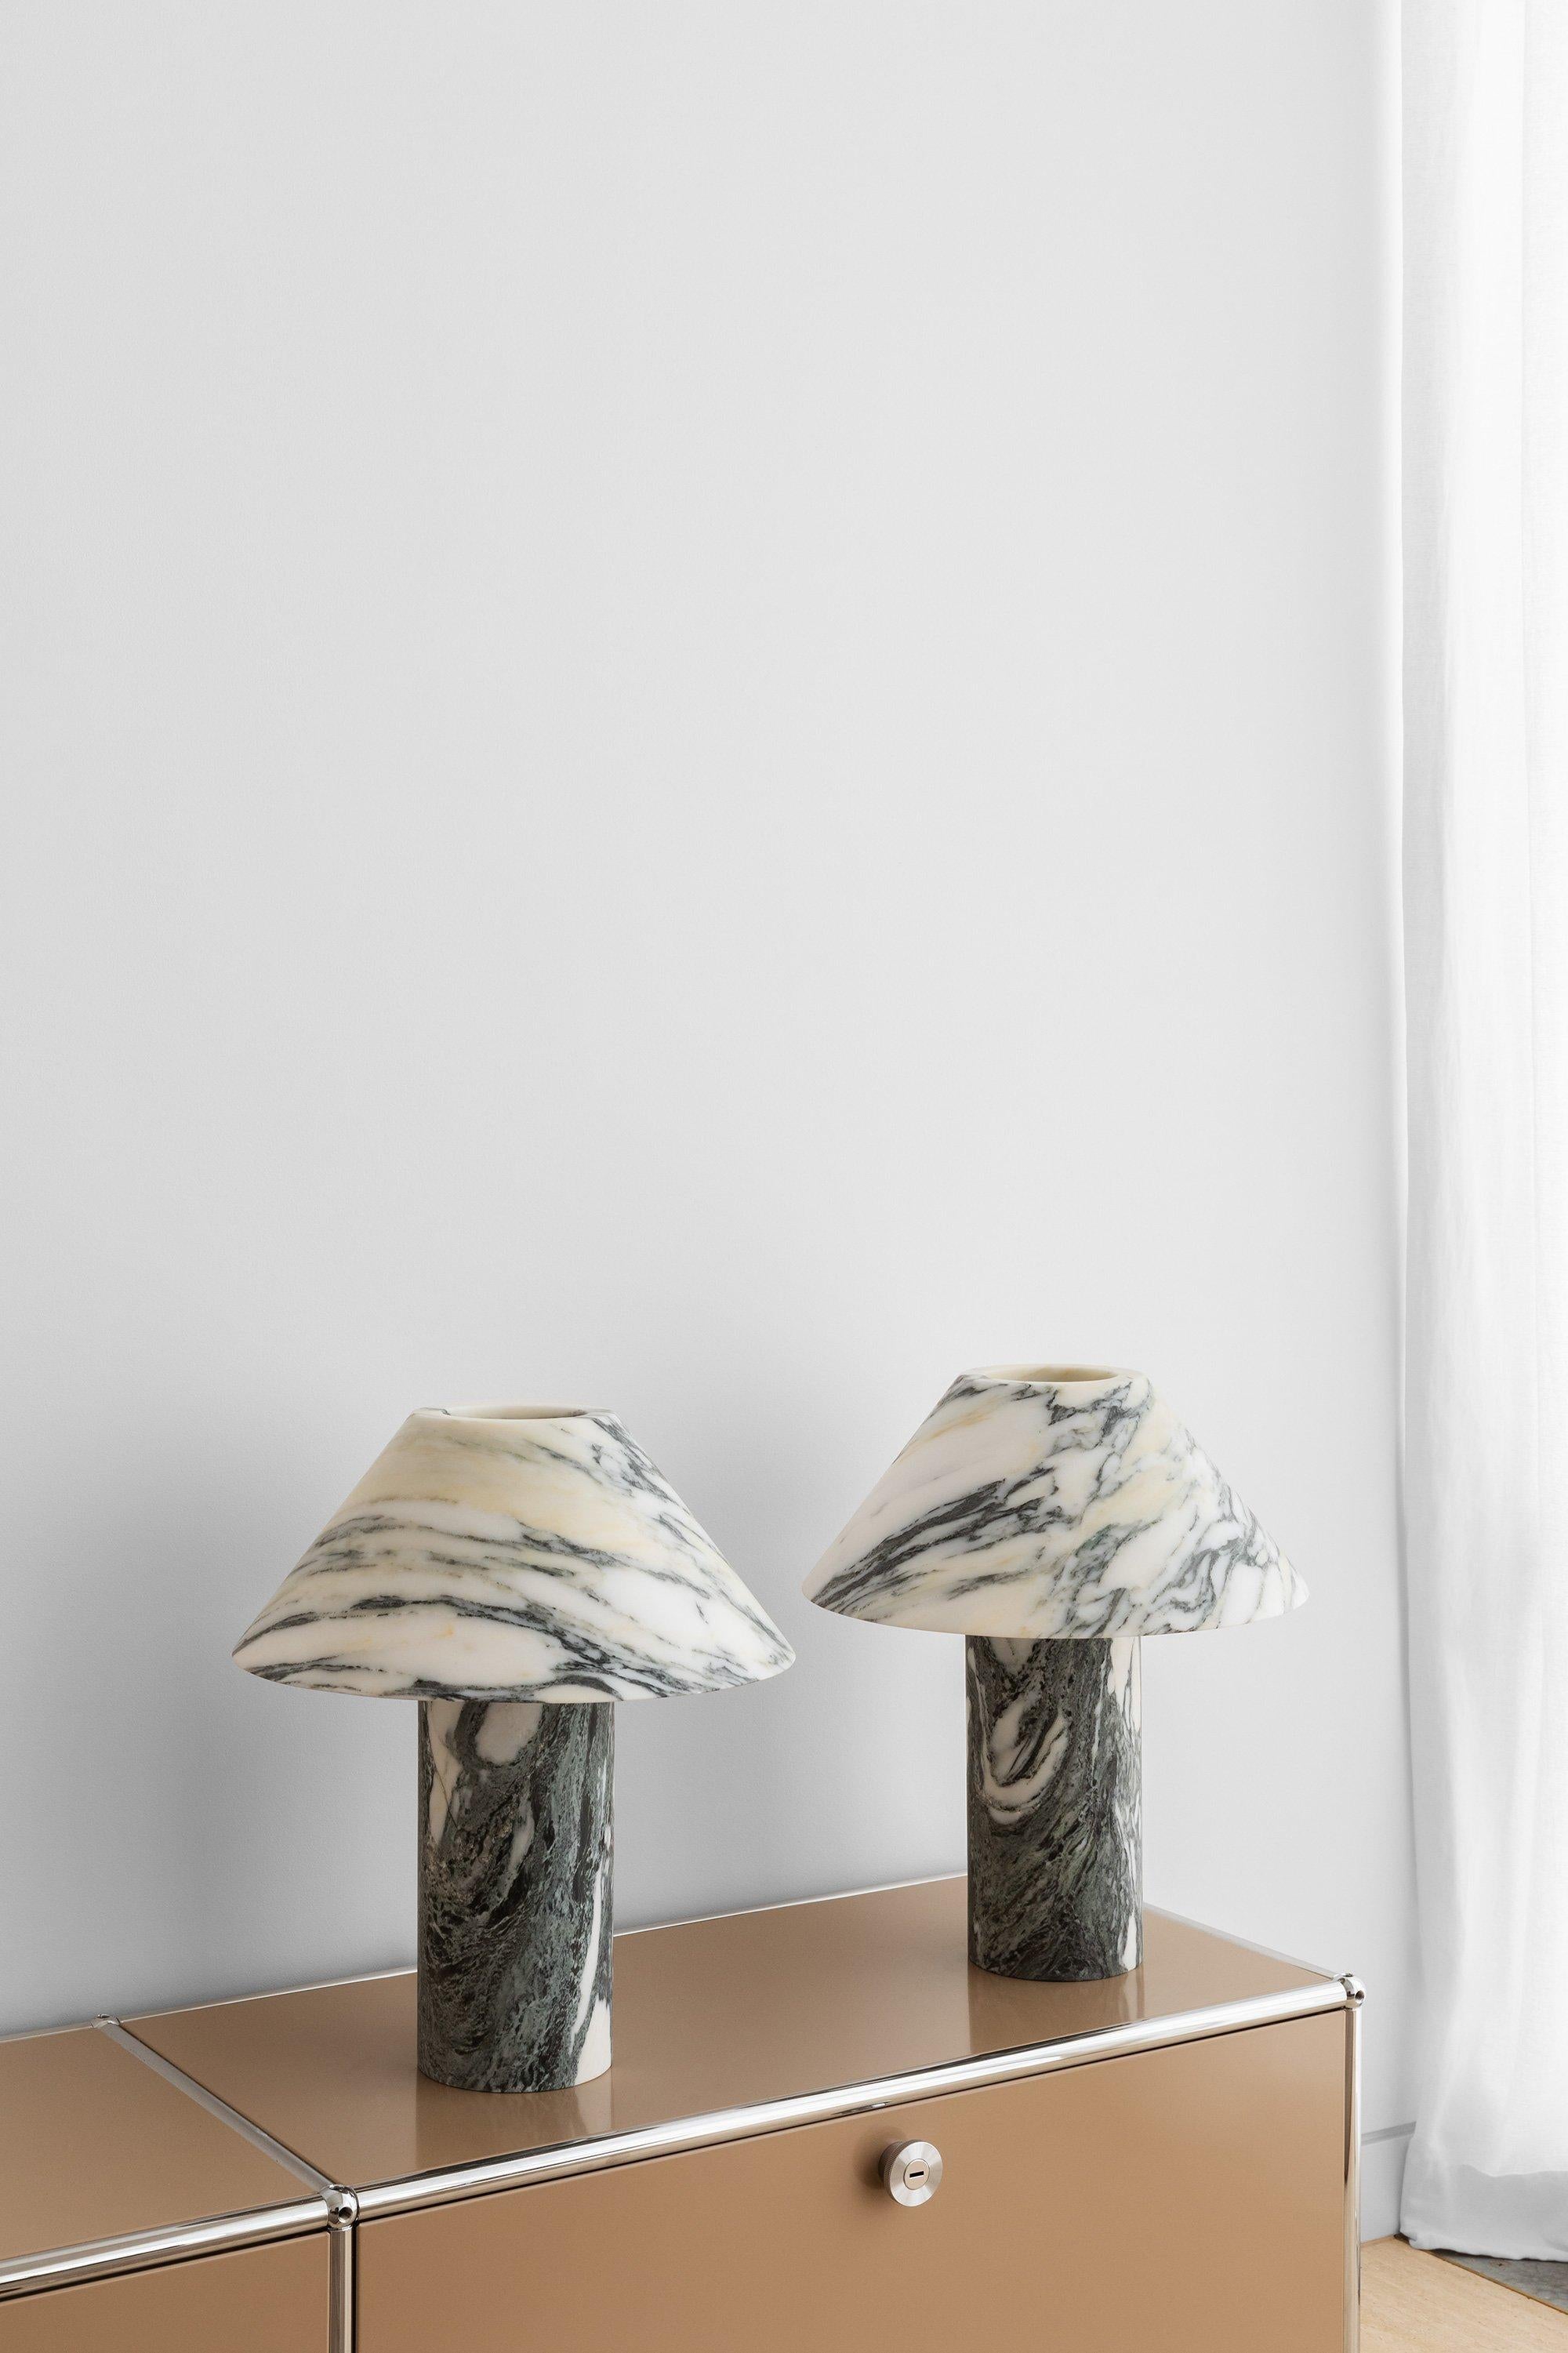 Pillar lamp in Arabescato marble by Henry Wilson
Dimensions: Surface sconce are 40 x 12 x 35 cm
Materials: Arabescato marble

Pillar lamp is hewn from two pieces of solid Arabescato marble. It is heavy and will require care in transport and a sturdy